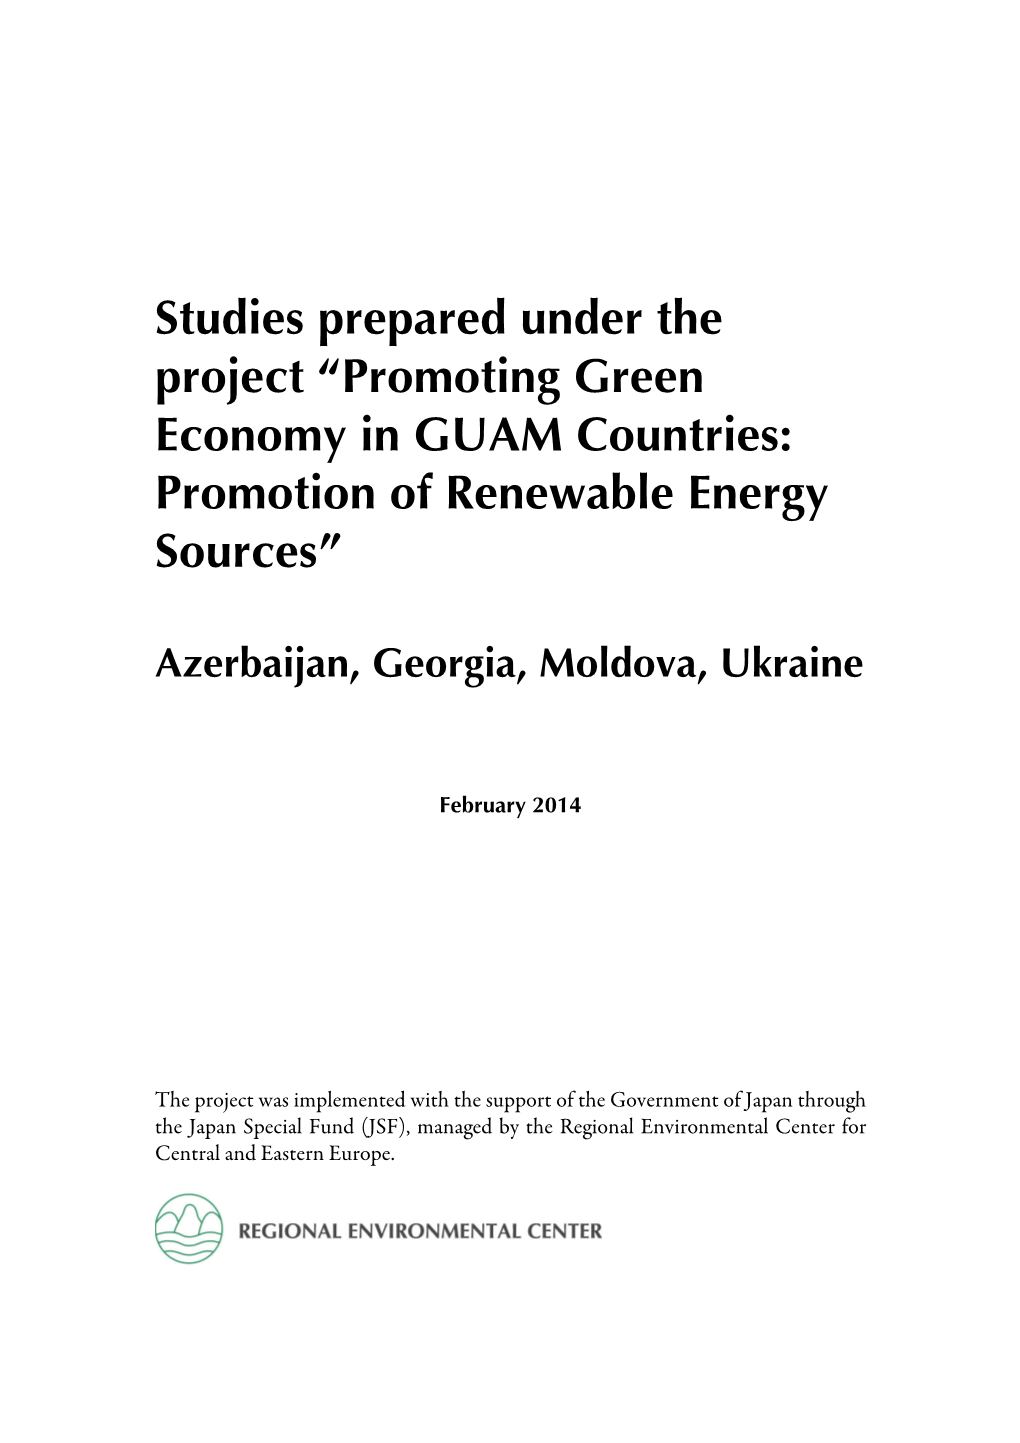 Studies Prepared Under the Project “Promoting Green Economy in GUAM Countries: Promotion of Renewable Energy Sources”